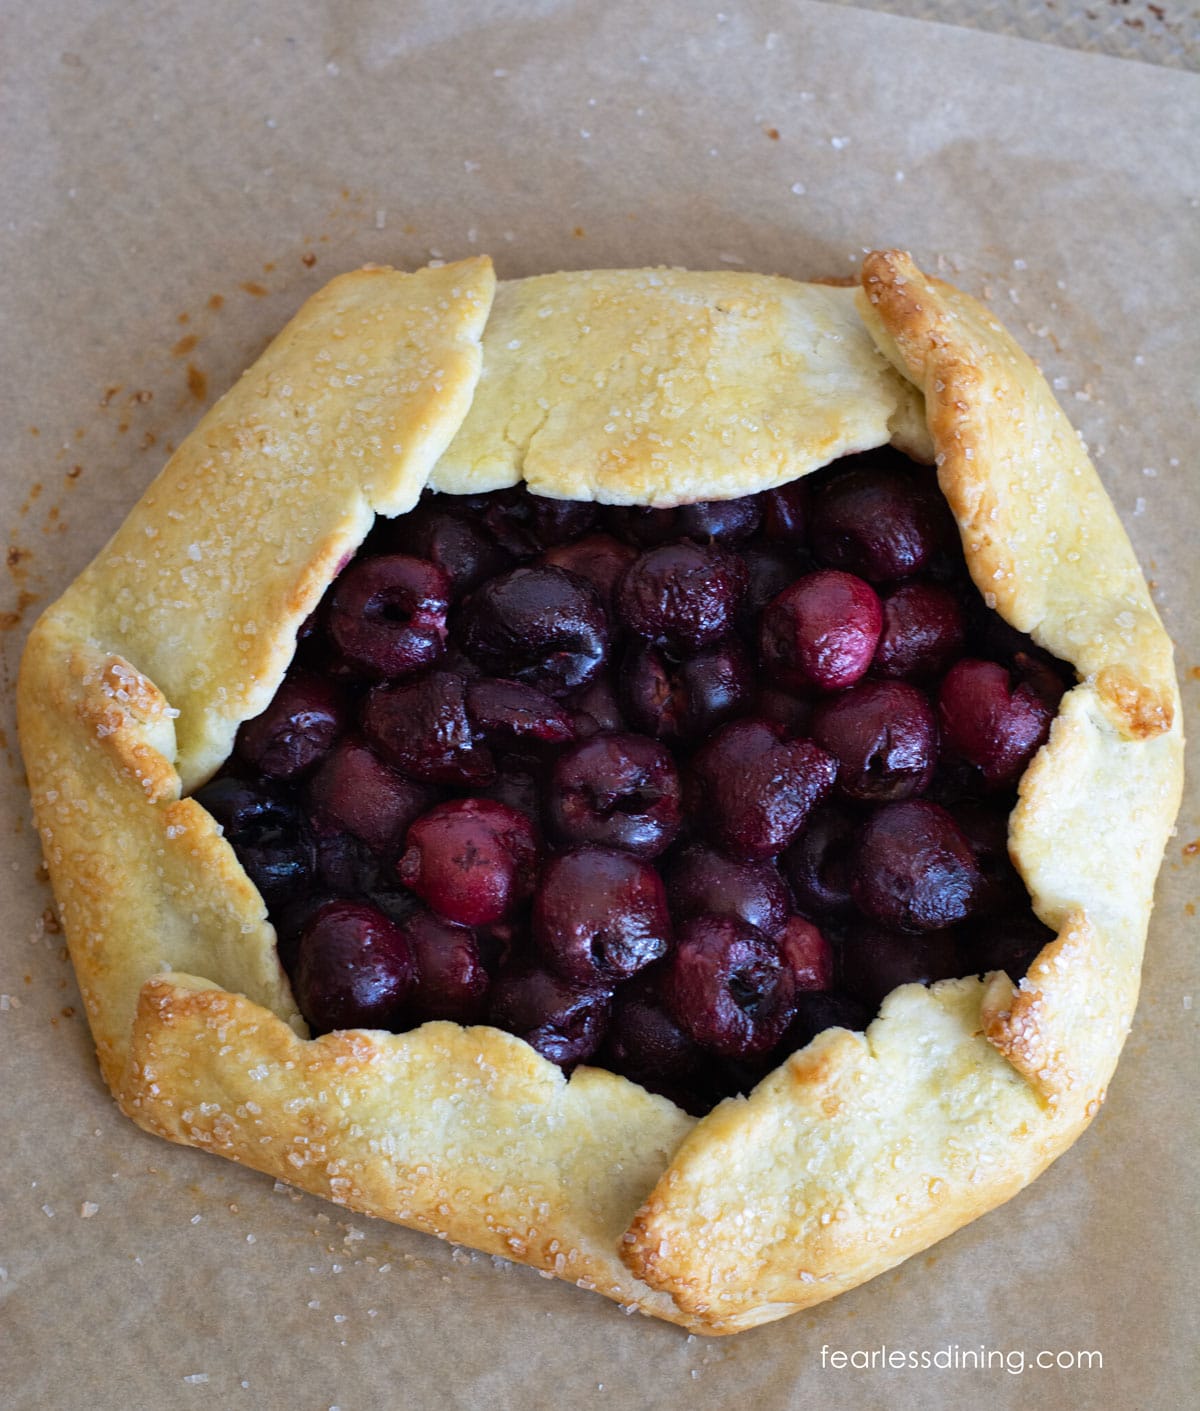 A baked gluten free cherry galette on a baking tray.